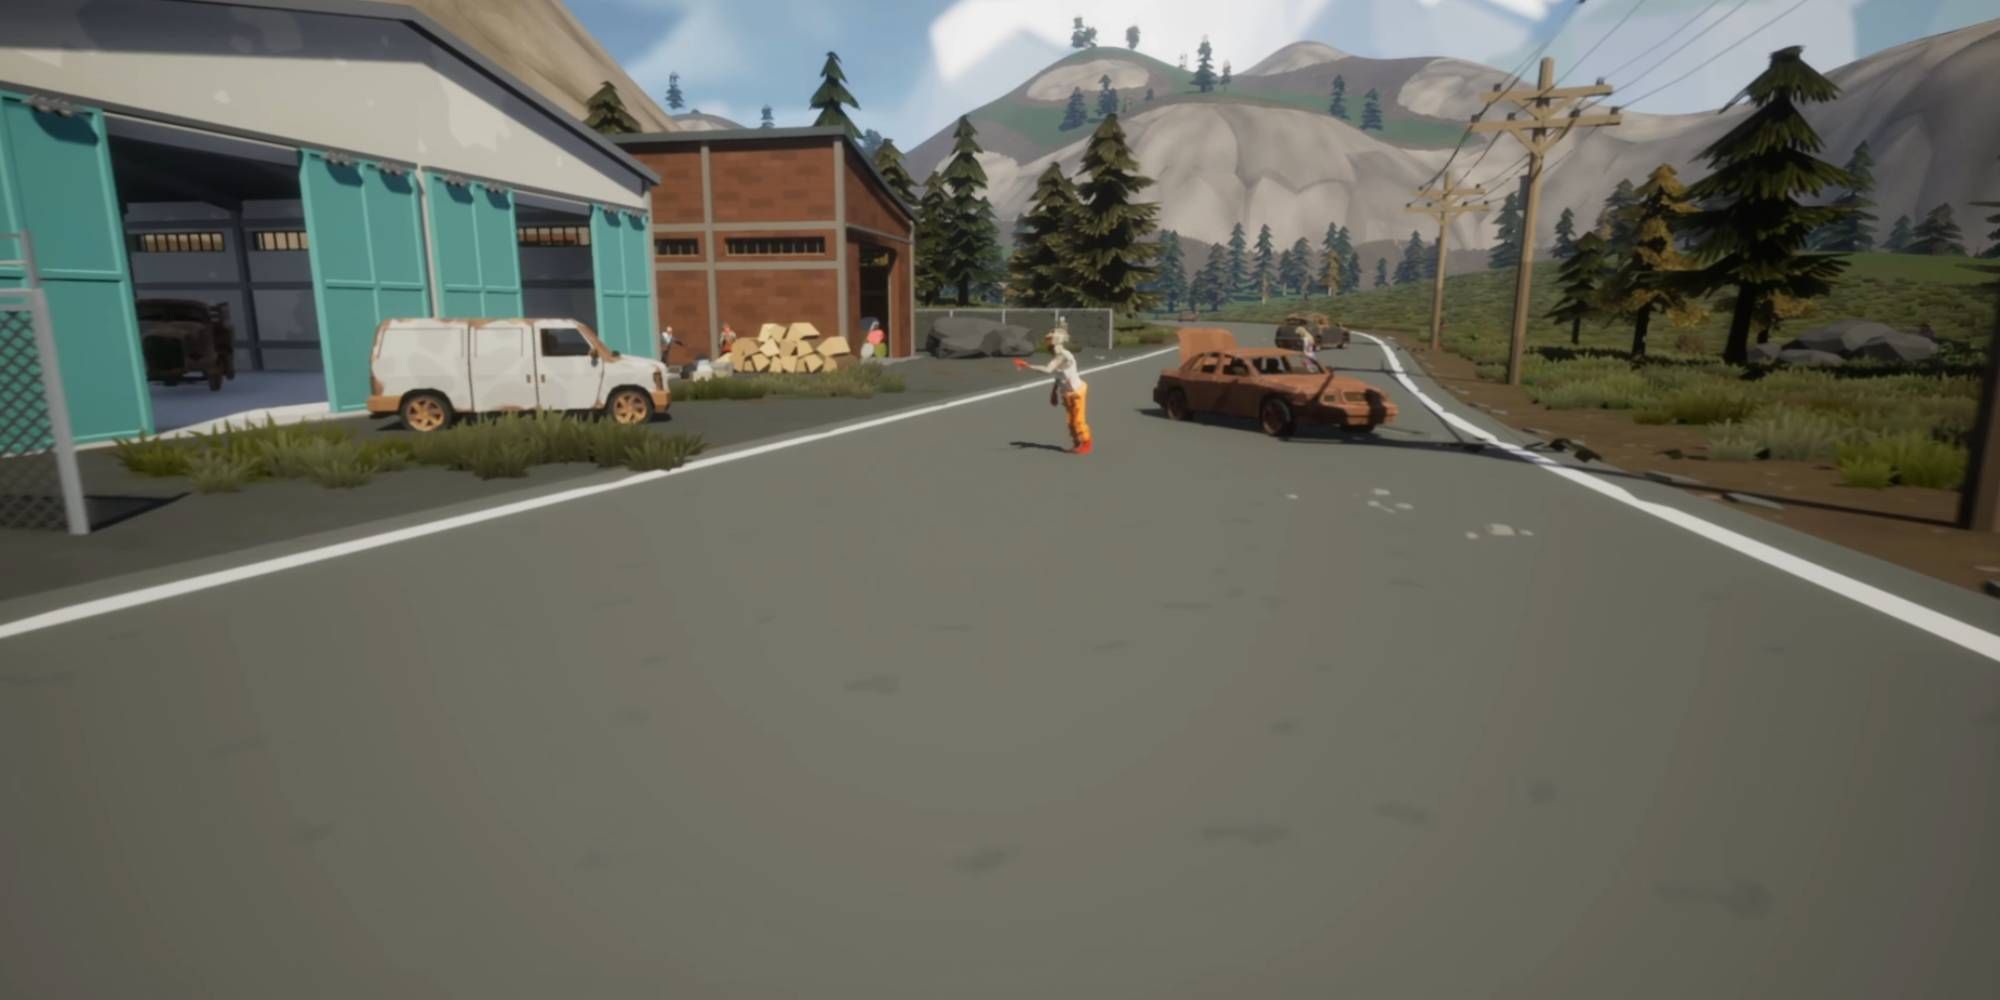 Zombies walking around the environment of SurrounDead on a road next to broken down cars